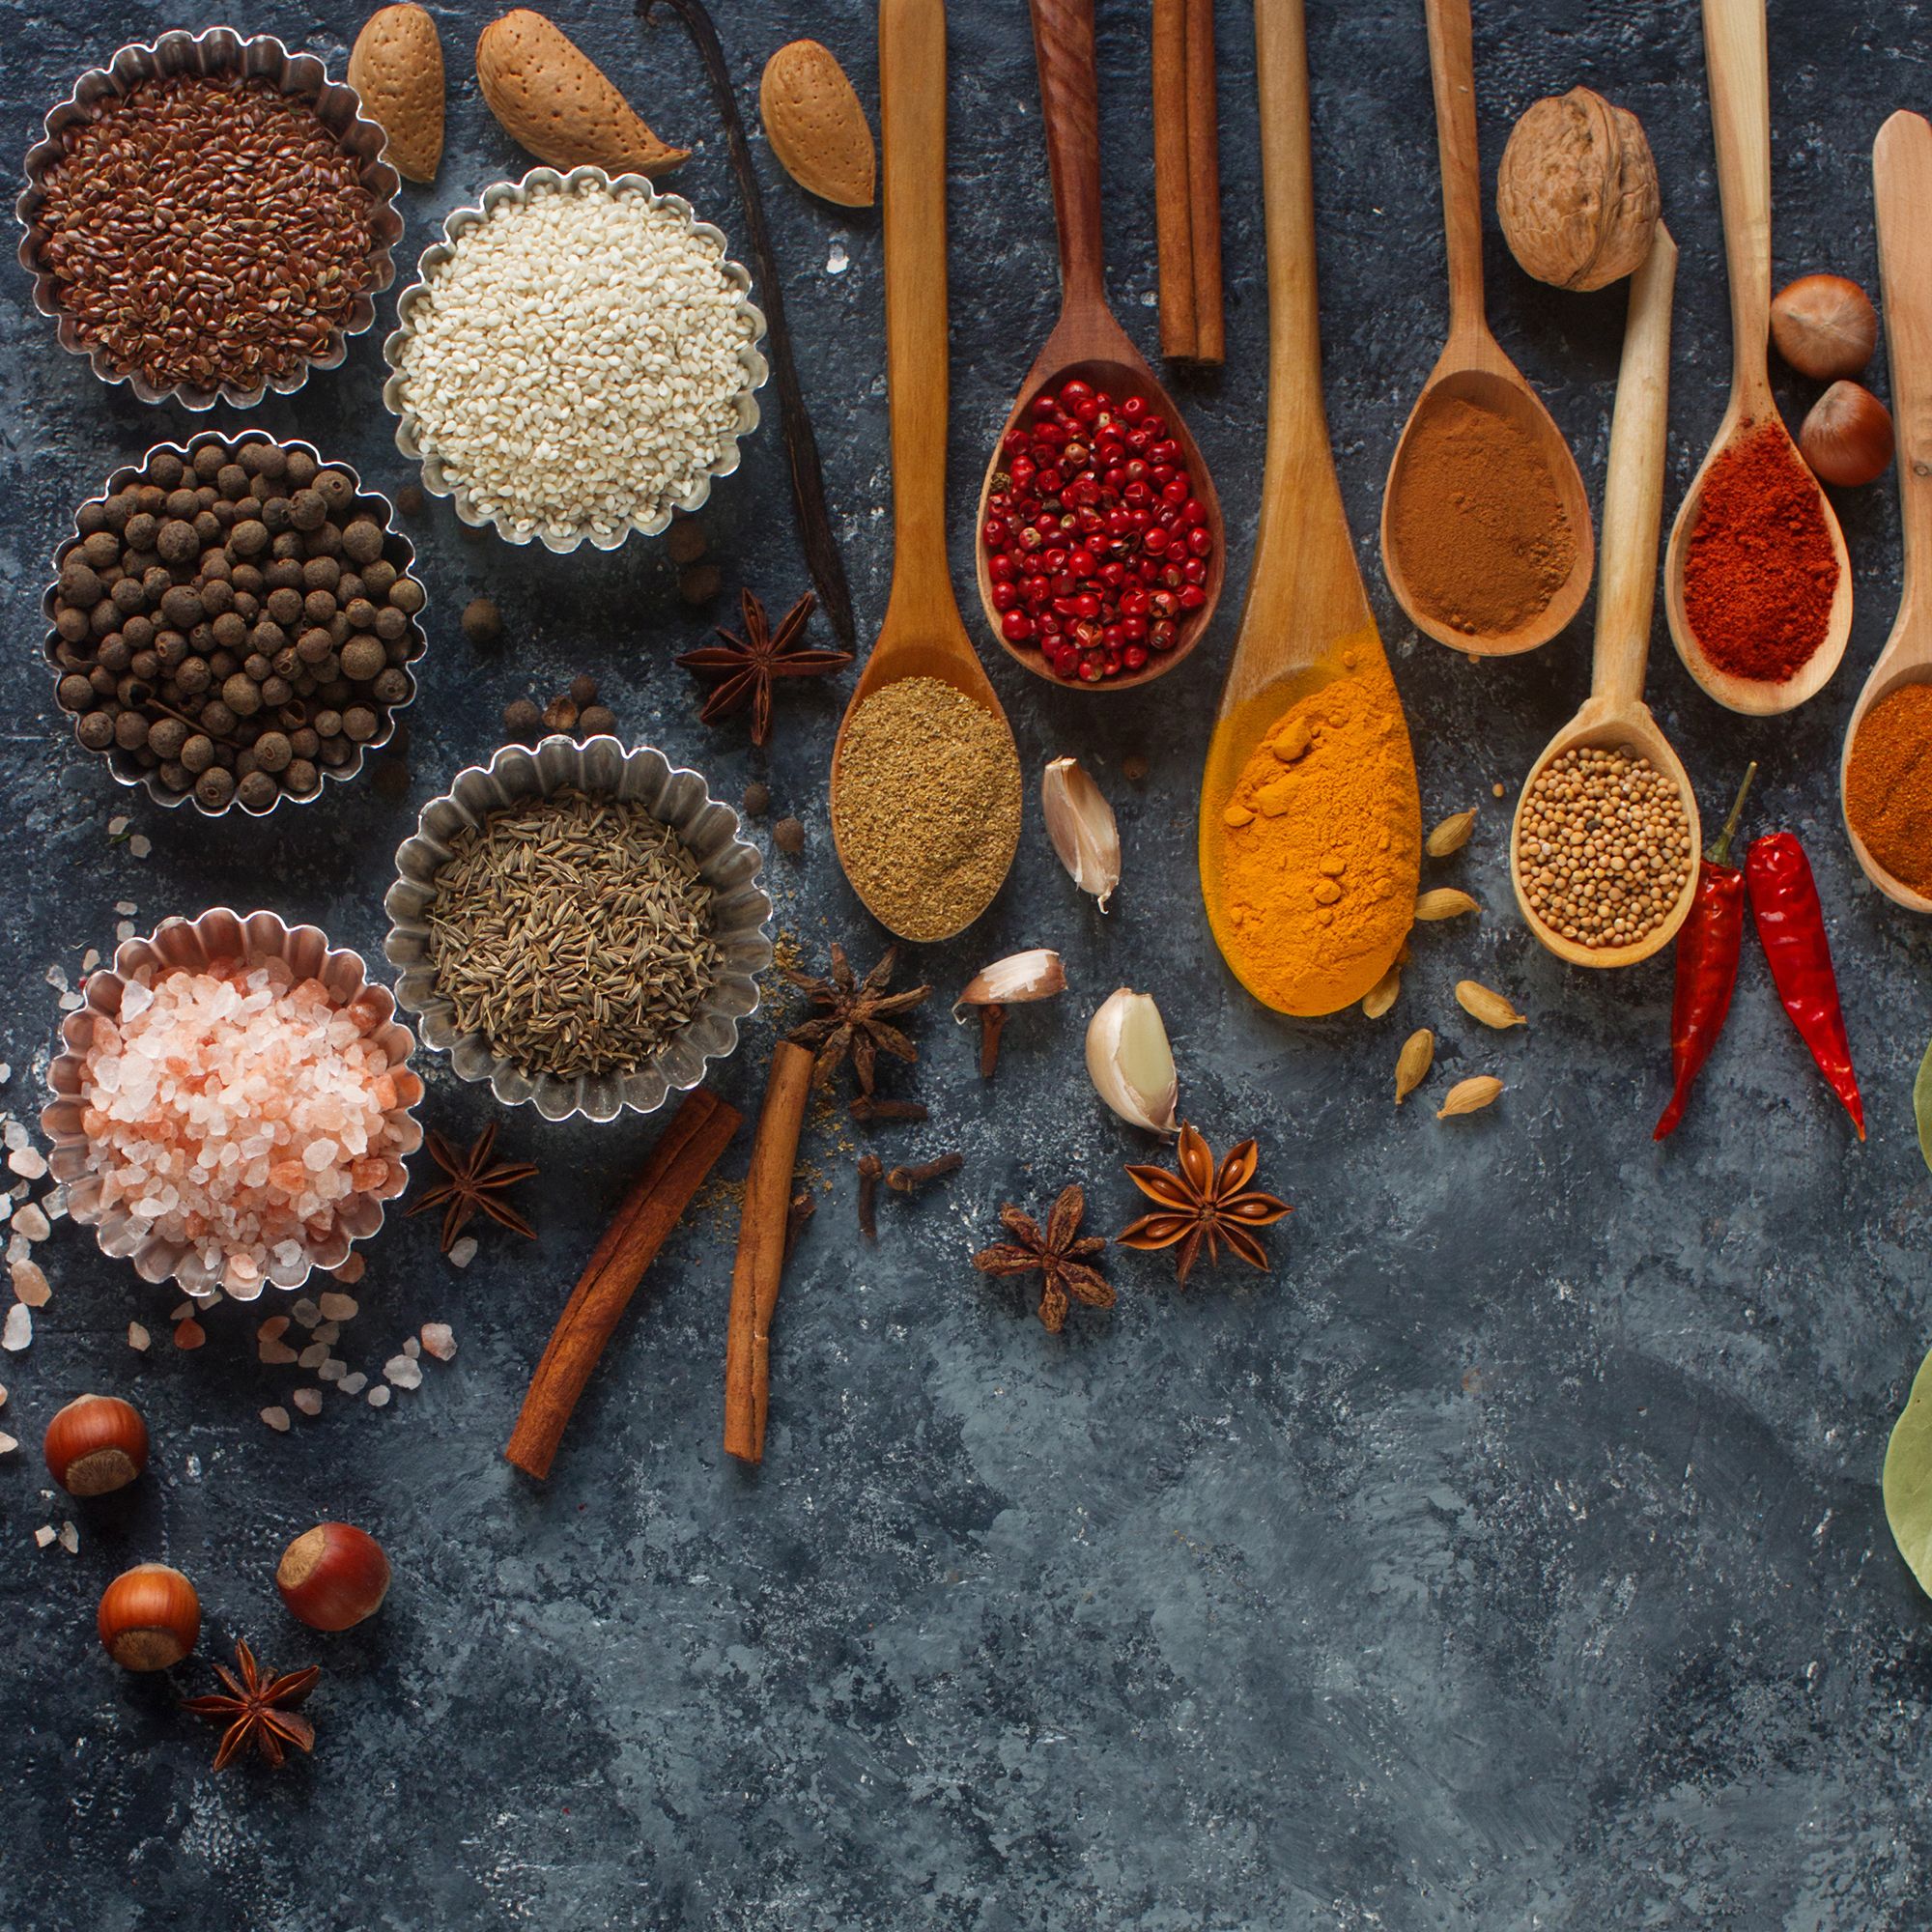 How to Use the Spice Rack to Cook Healthier Meals